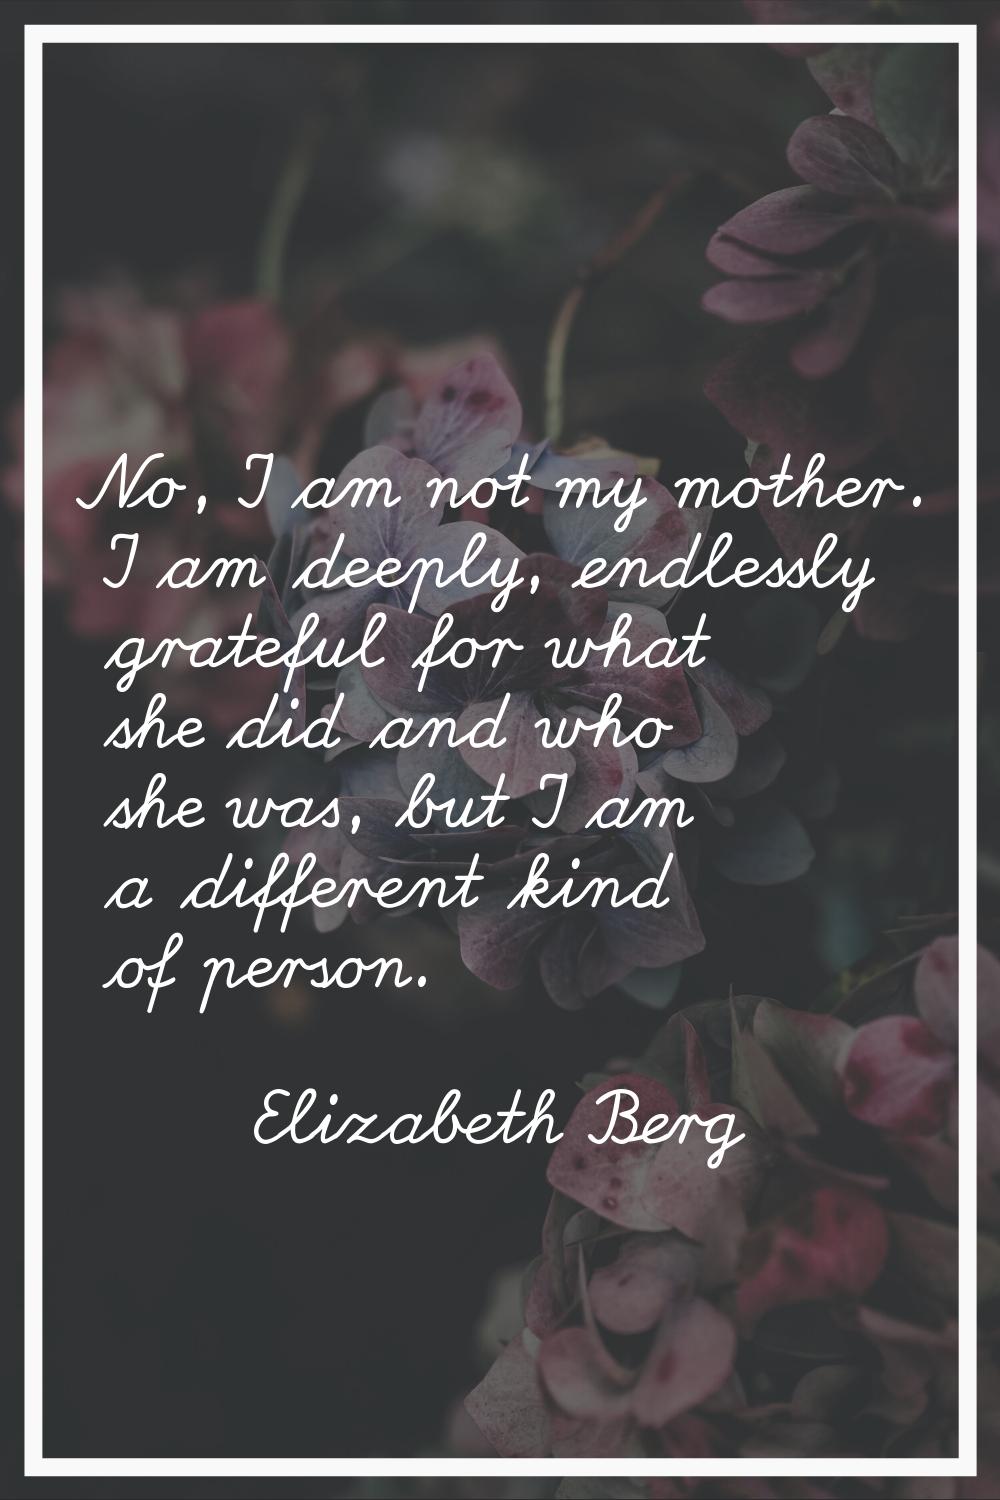 No, I am not my mother. I am deeply, endlessly grateful for what she did and who she was, but I am 